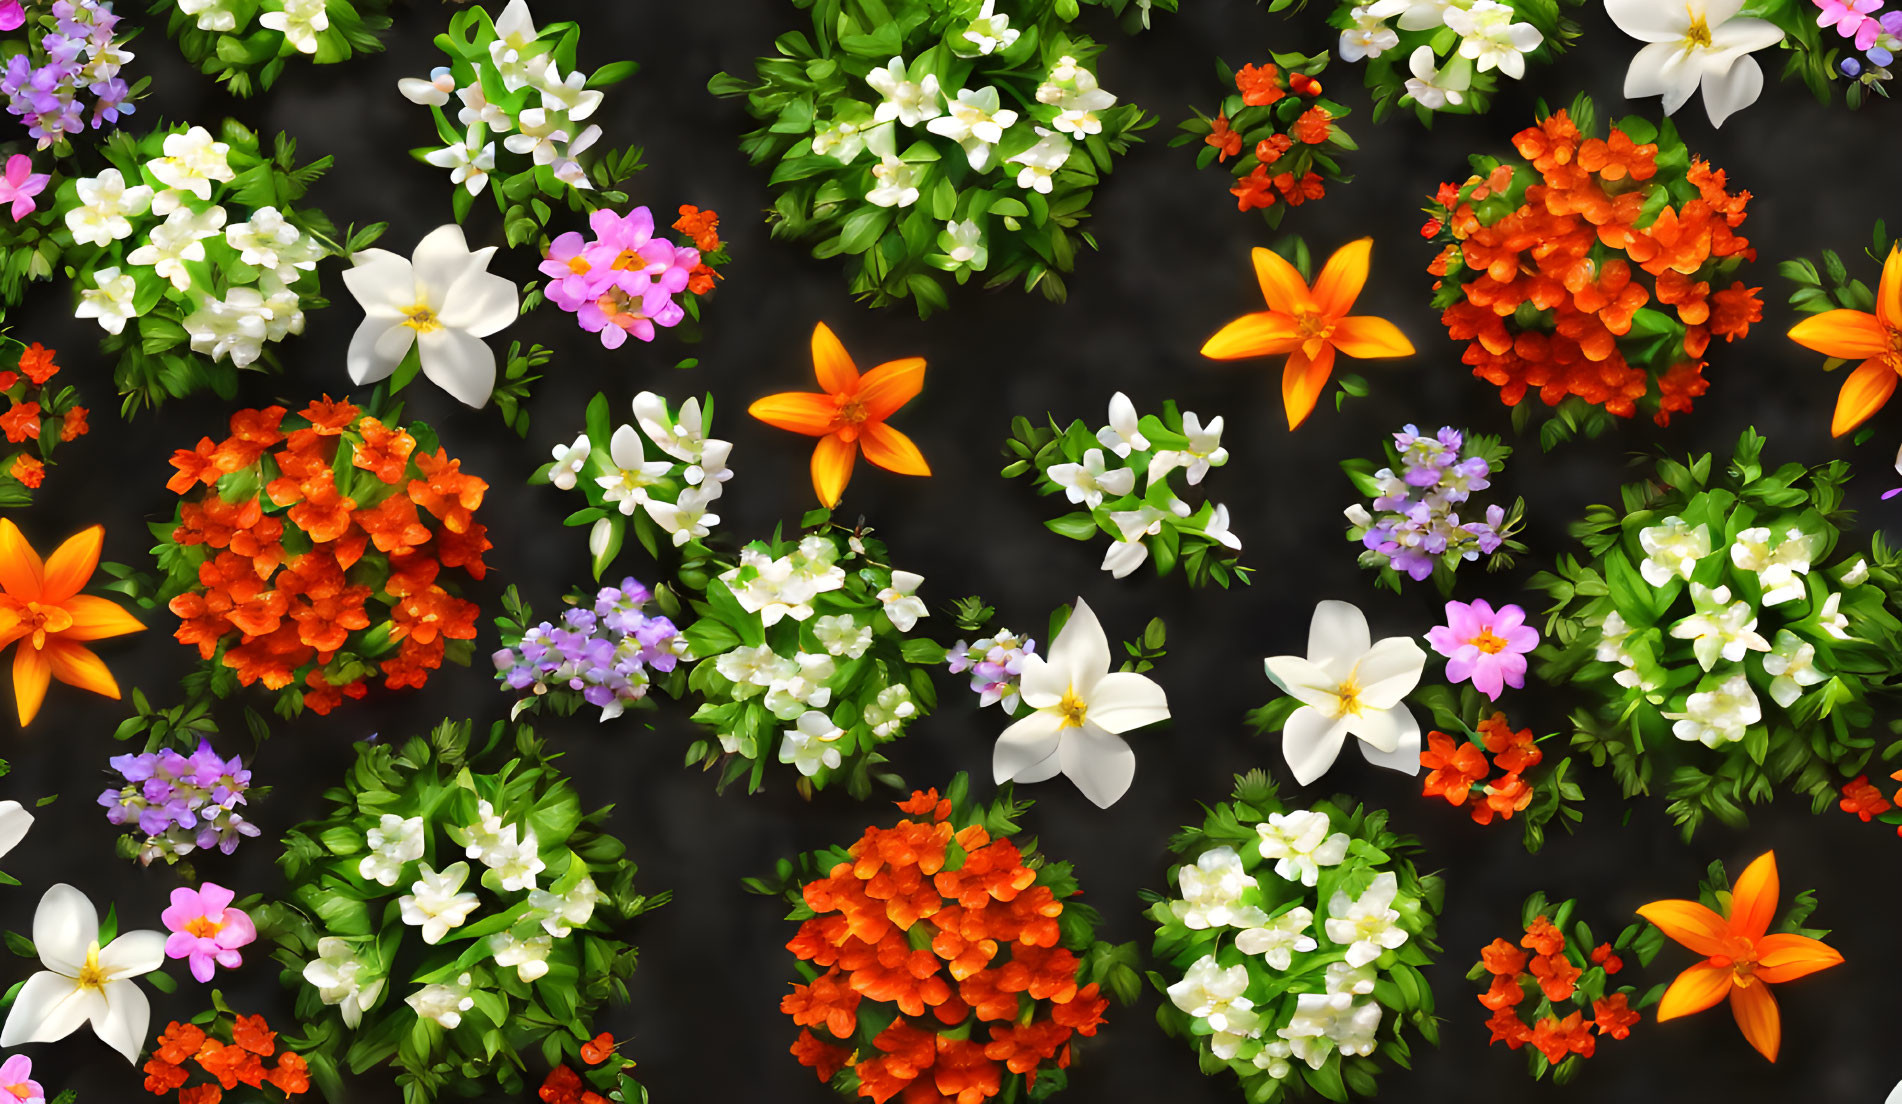 Assorted colorful flowers on dark background - White, orange, purple, red